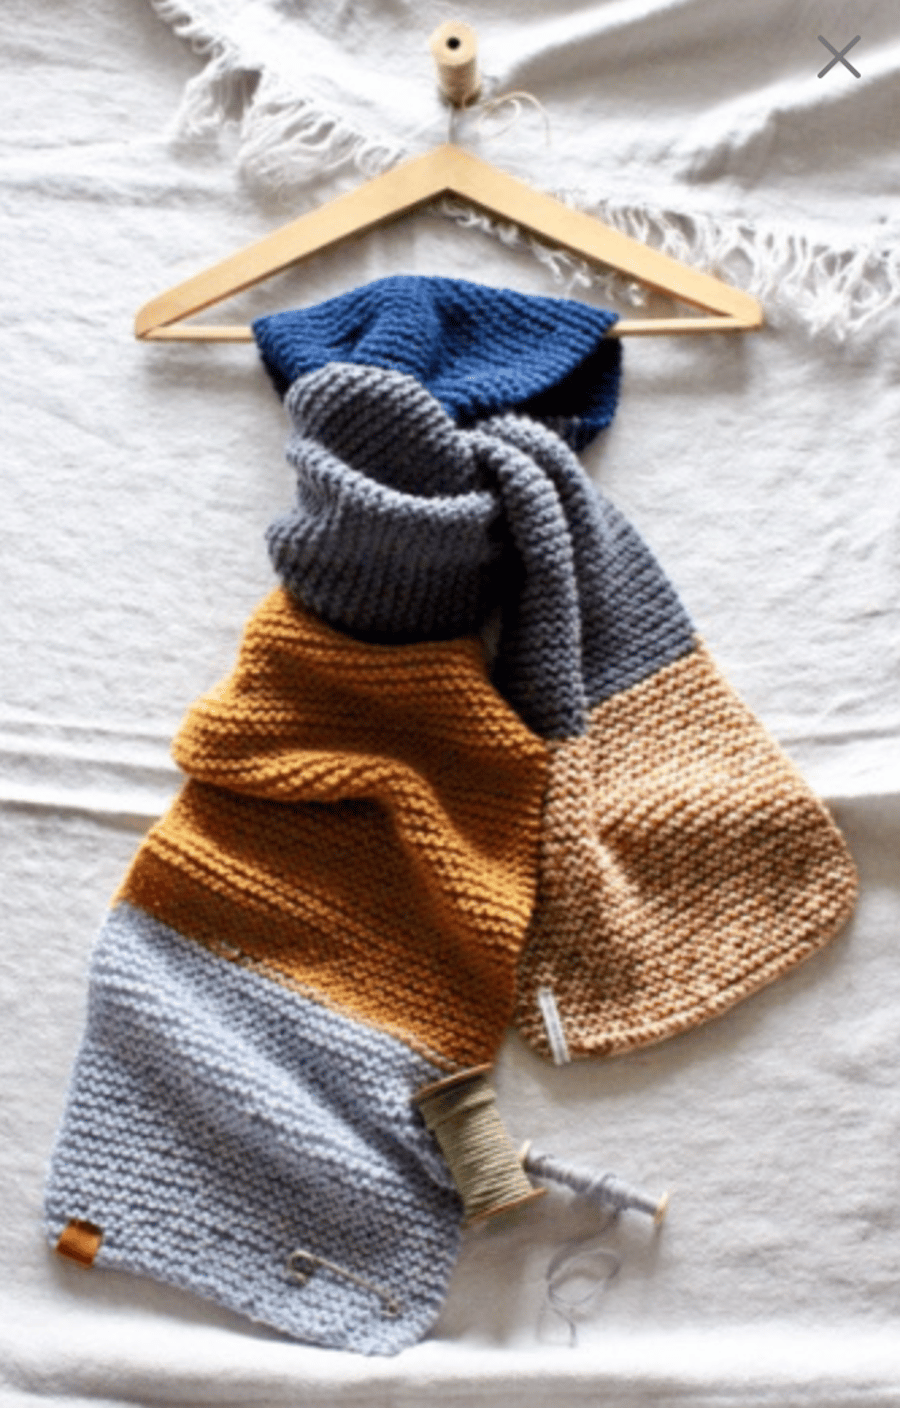 Hand-knitted scarf